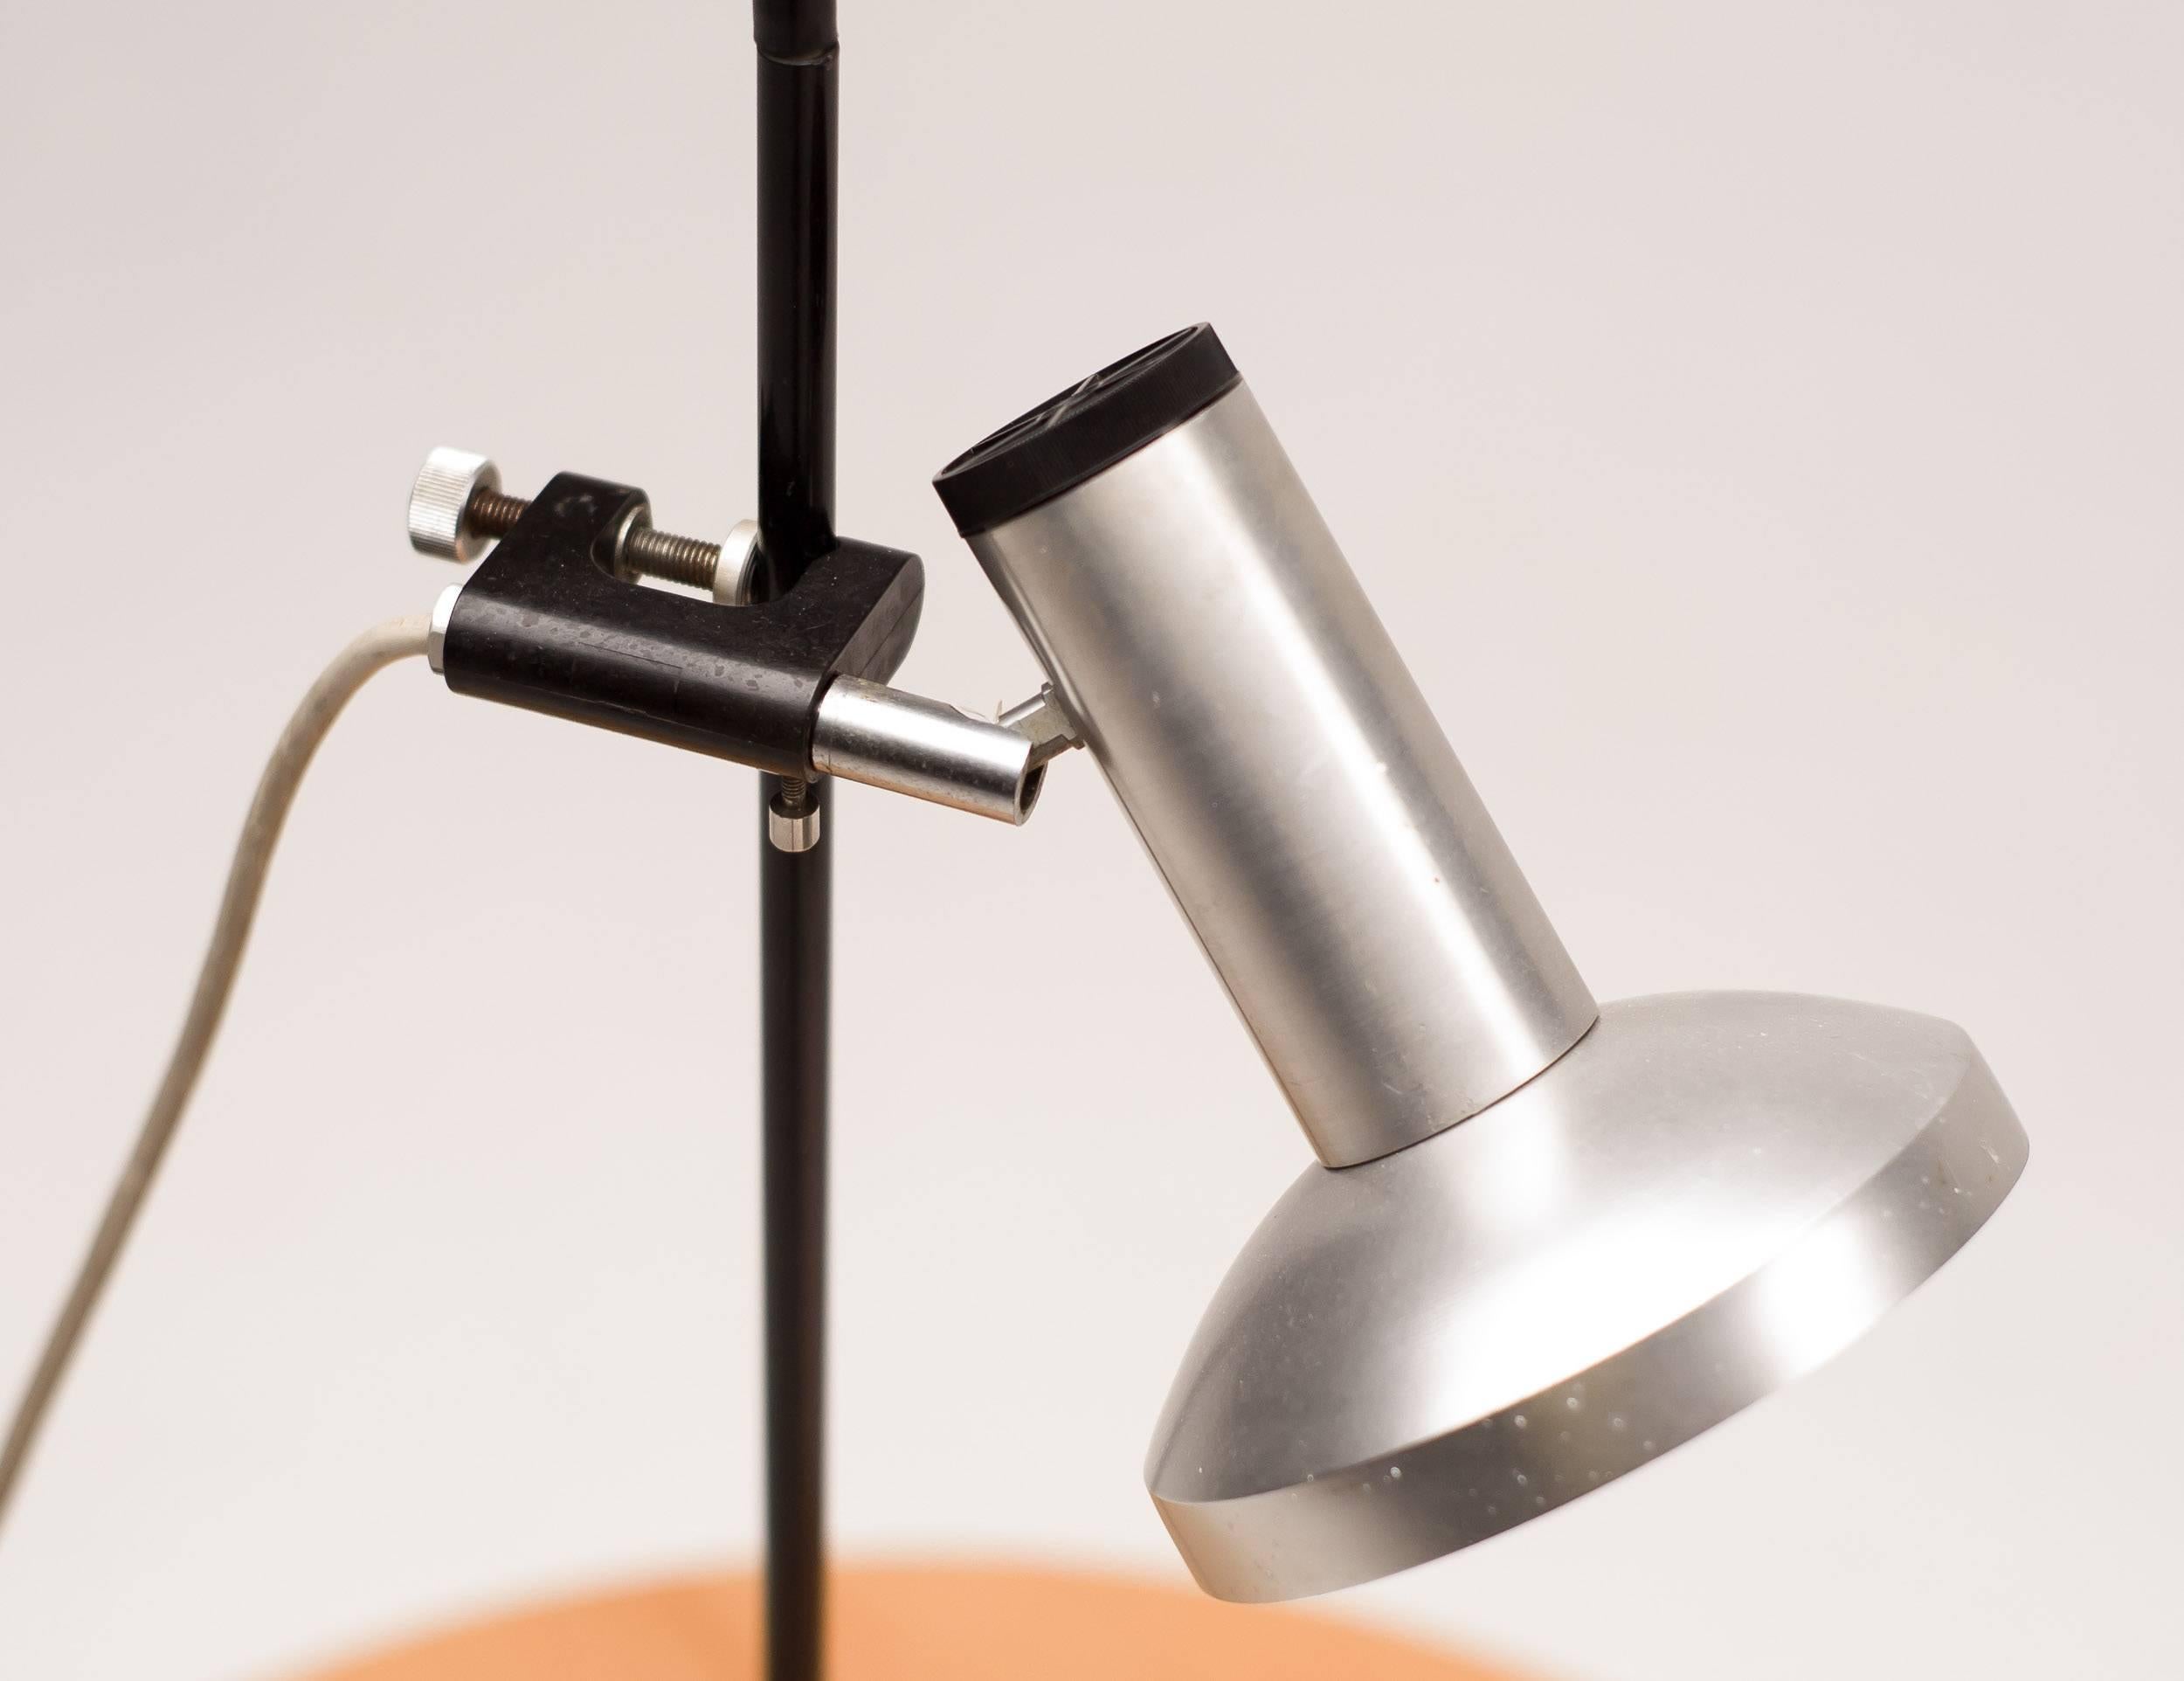 Nice table lamp with aluminium shade, adjustable with a clamp.
Functional industrial design.

Excellent fast and affordable worldwide shipping.